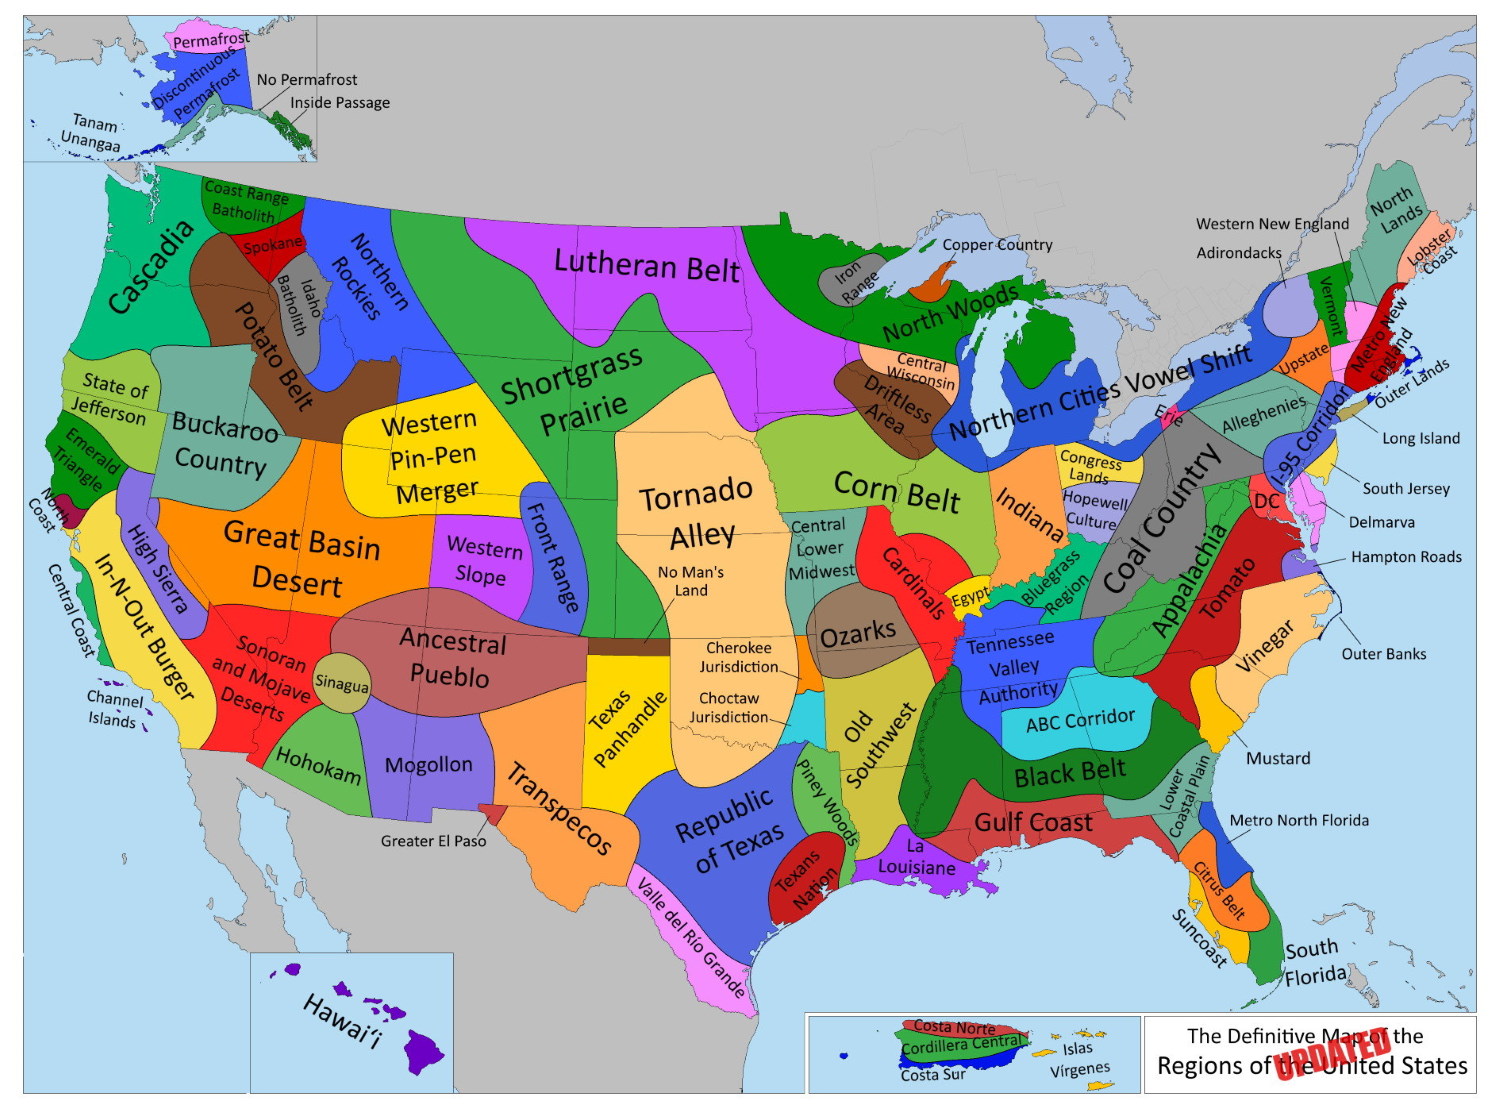 definitive regions of the united states smaller.jpg